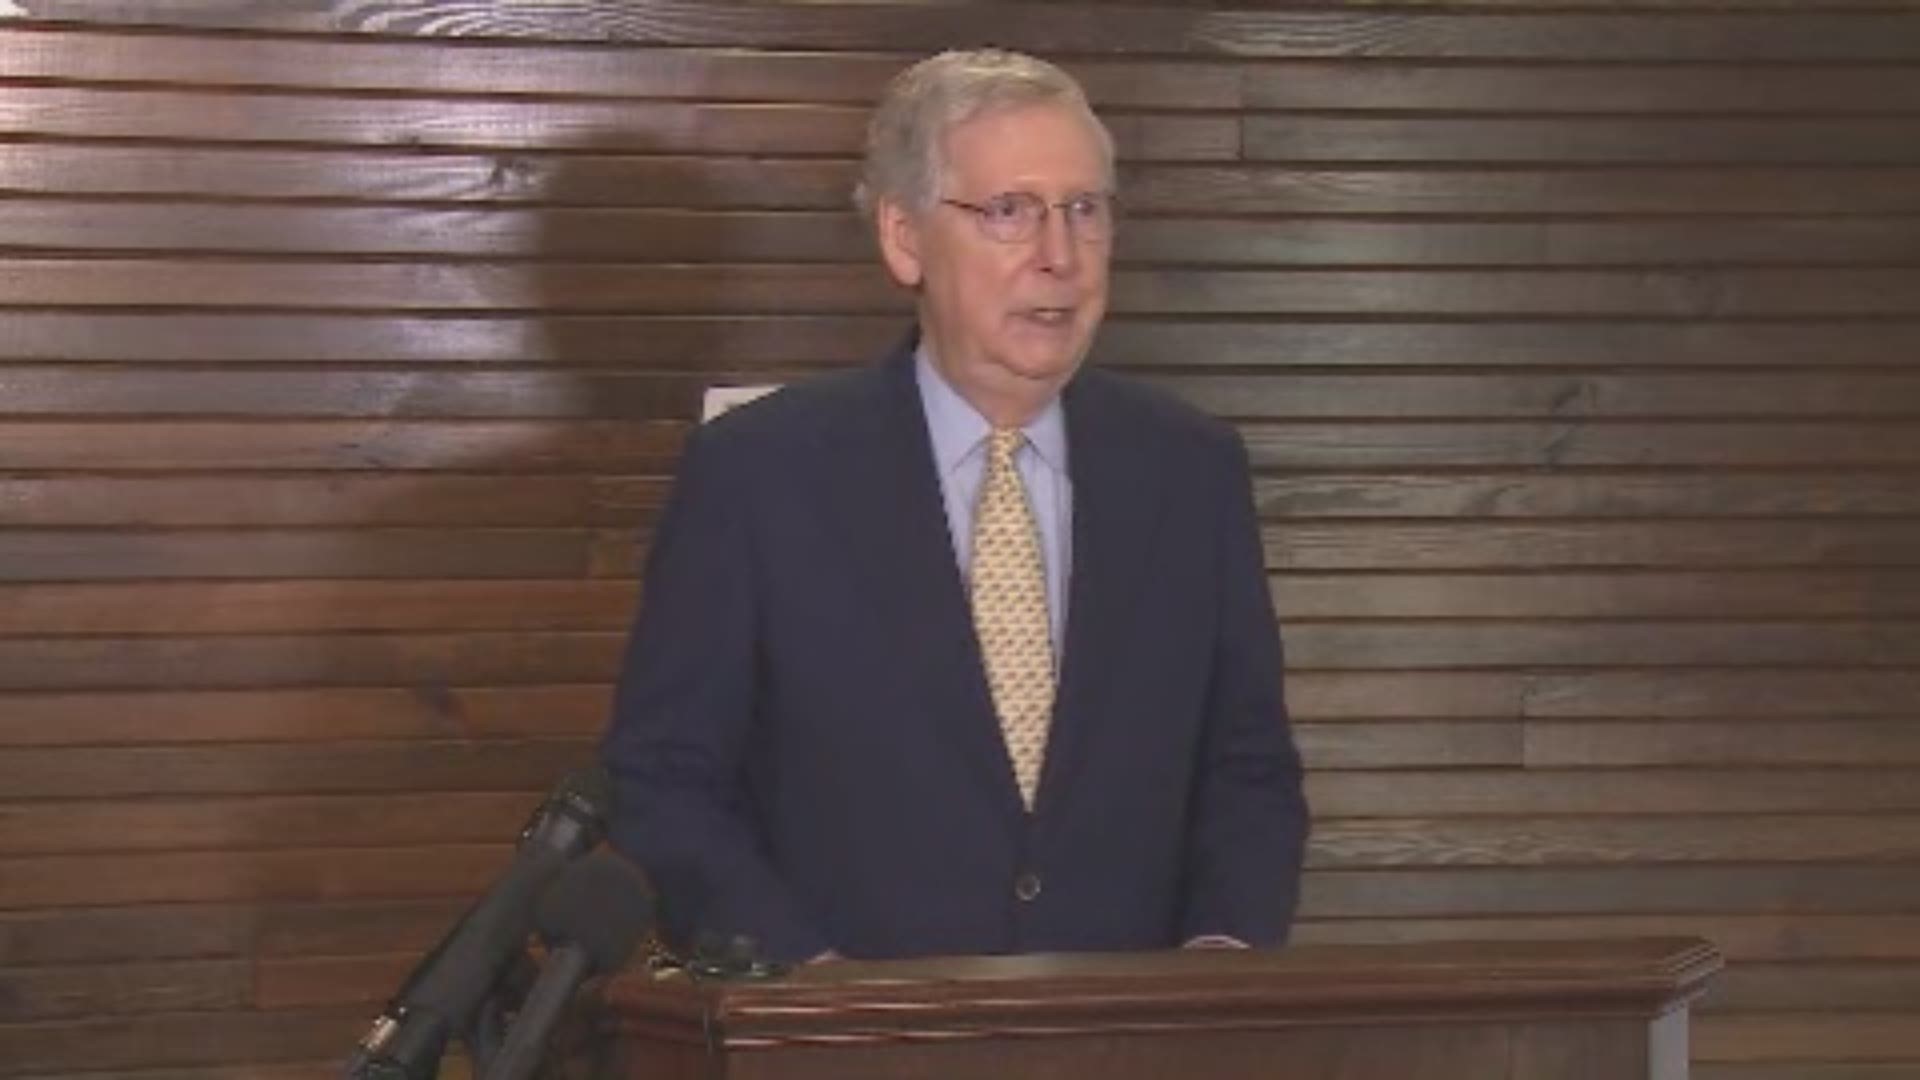 U.S. Sen. Majority Leader Mitch McConnell said on Tuesday afternoon, he felt U.S. Attorney General William Barr was as open and transparent as possible.